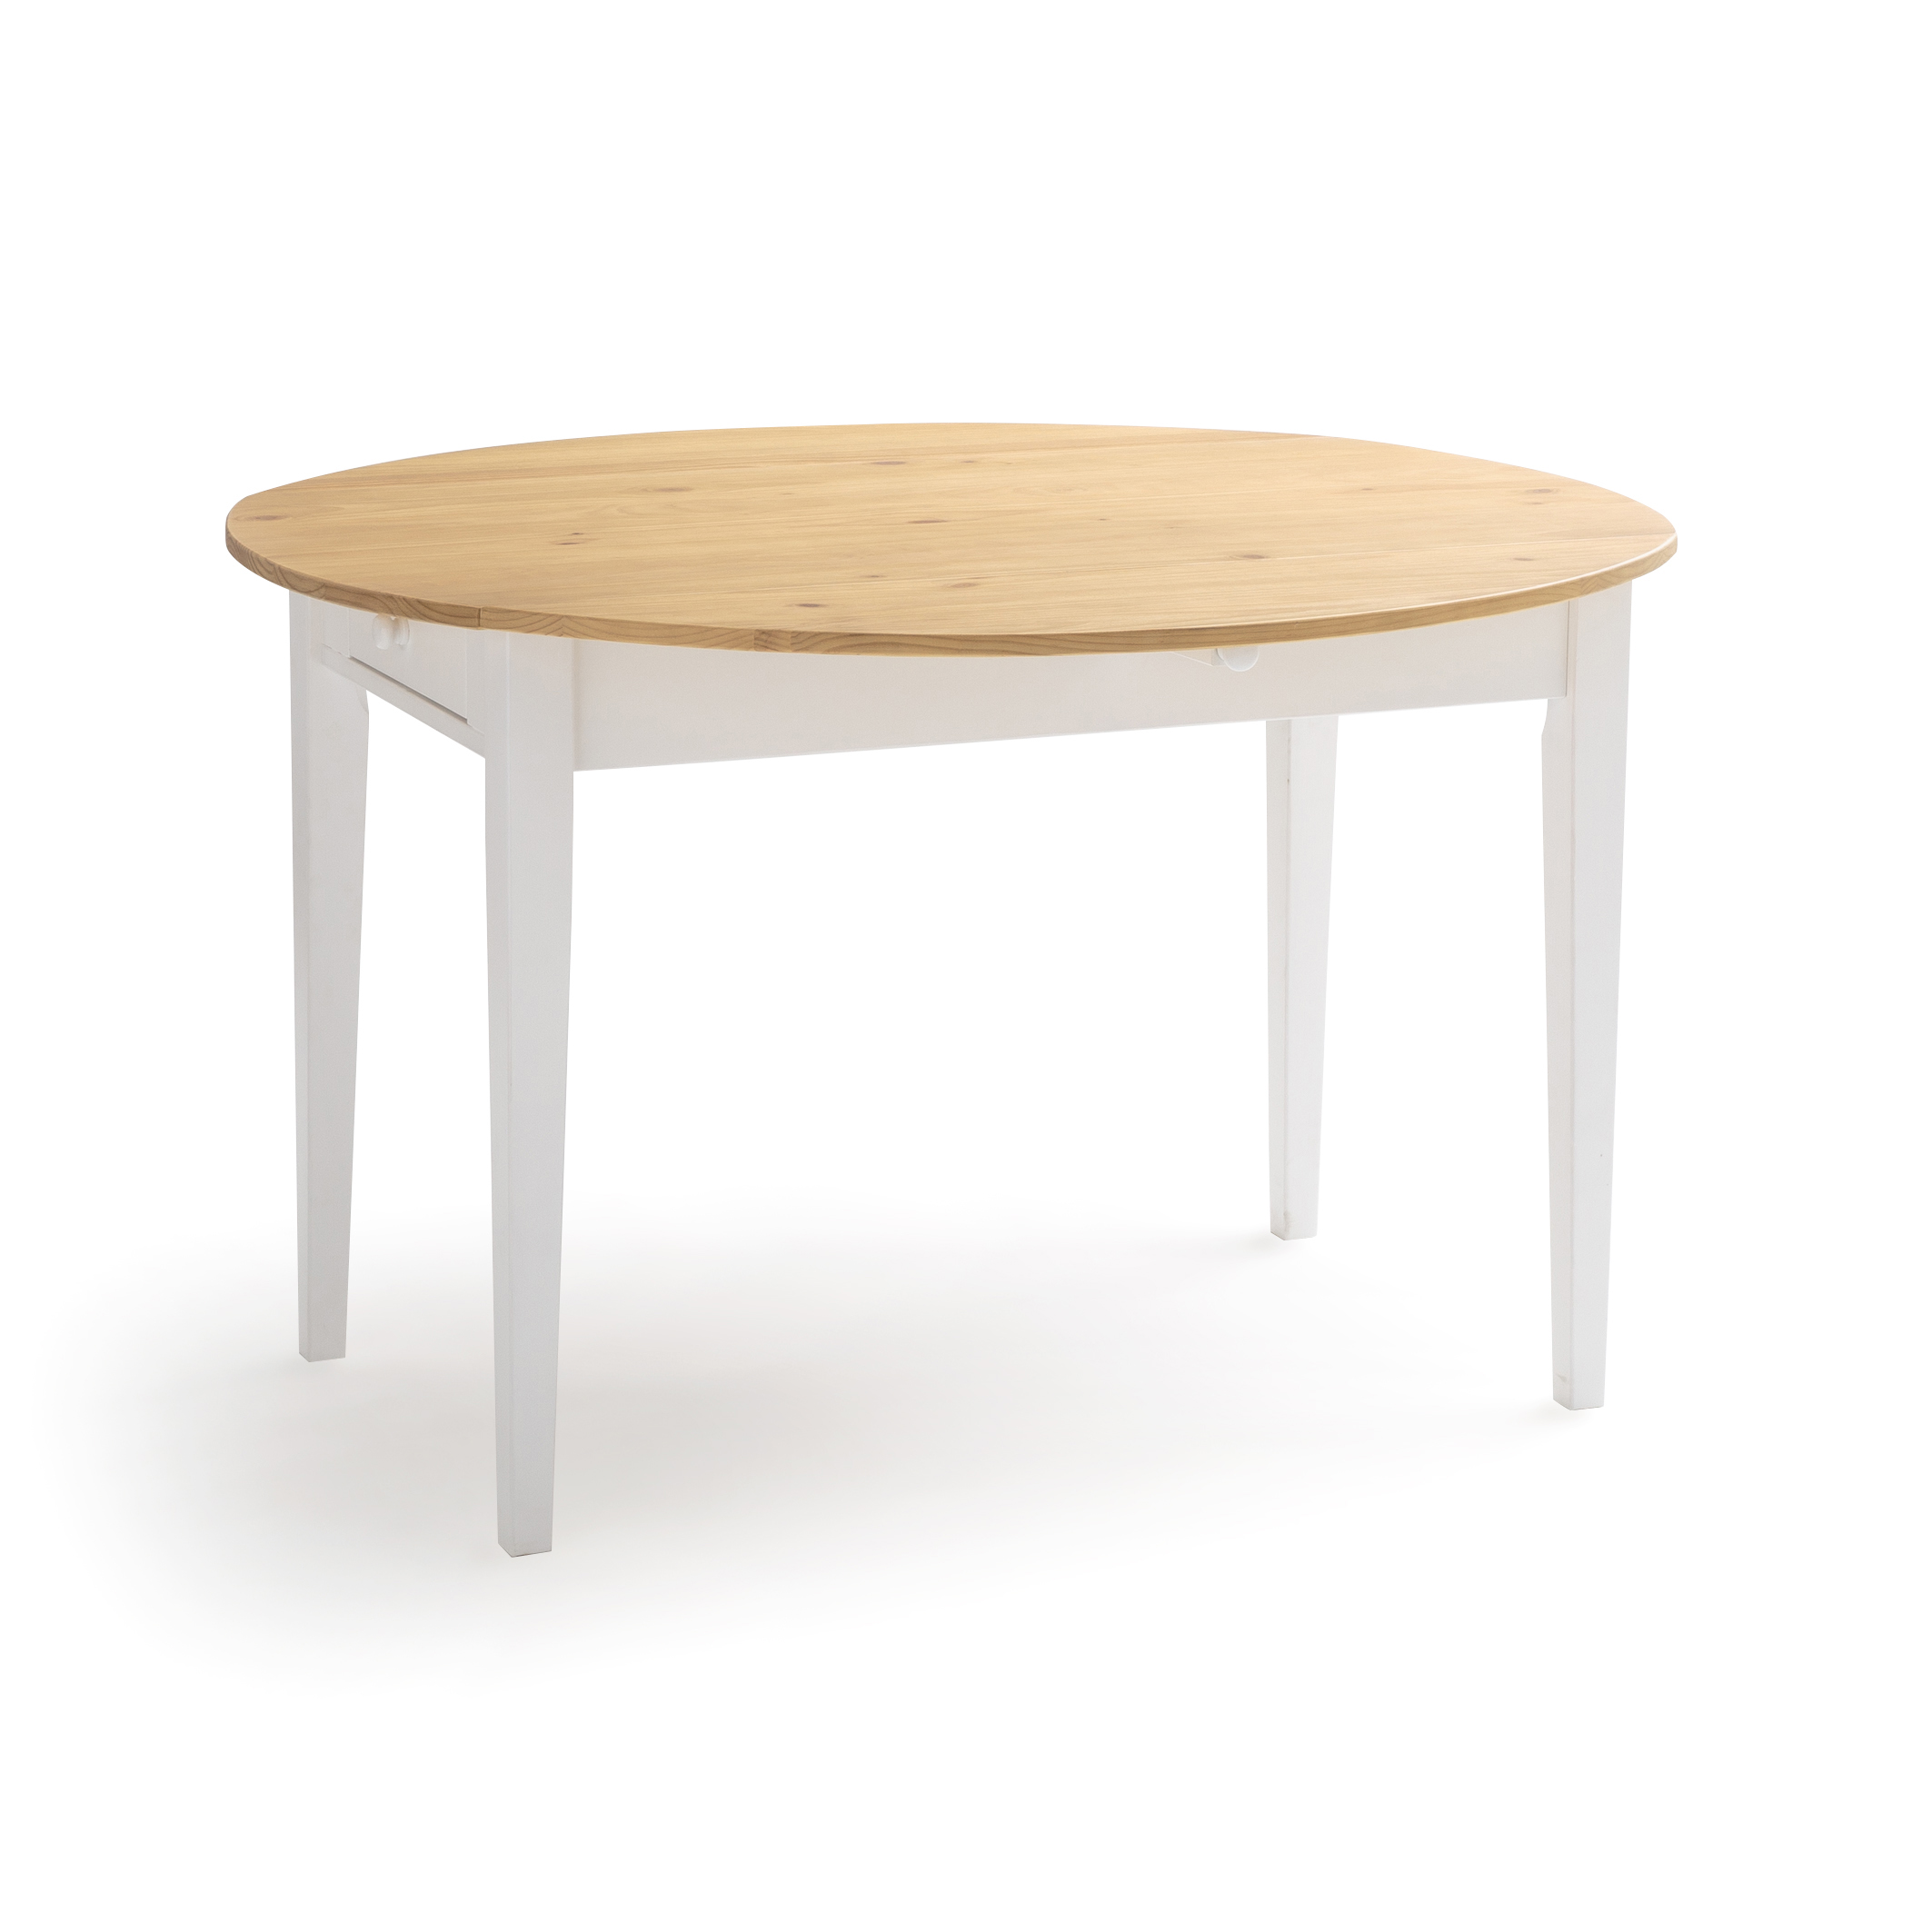 Alvina Dining Table With 2 Drawers, Round Dining Table With Drawers